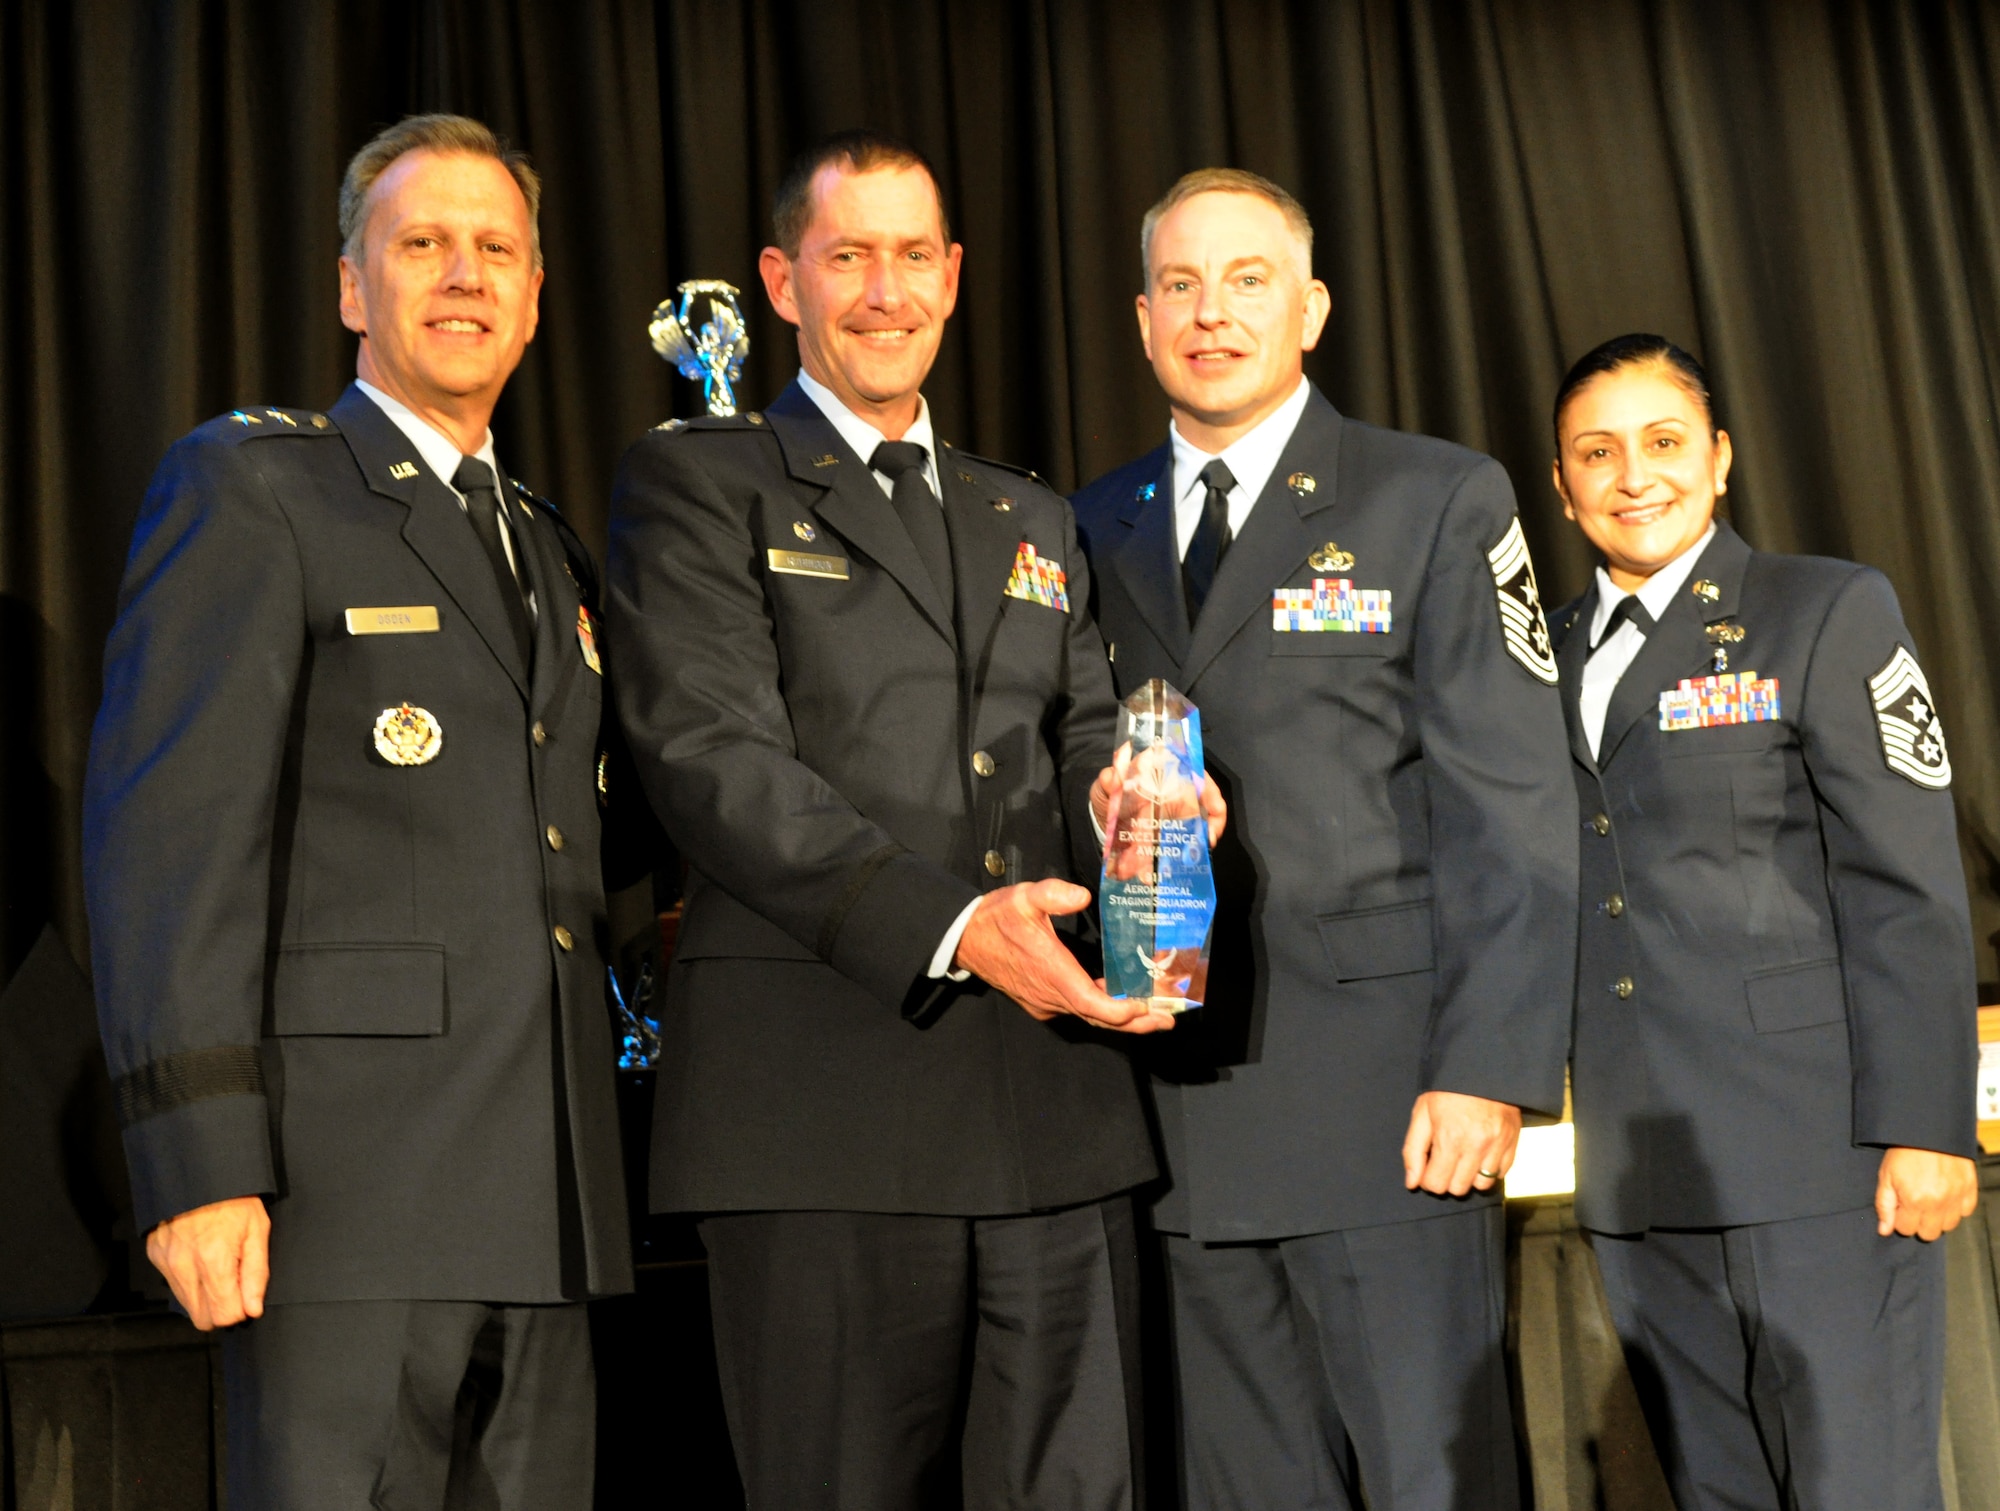 The 911th Airlift Wing's Aeromedical Staging Squadron were the recipients of 4th Air Force's Medical Excellence Award for 2019. The trophy was present during the  20th Annual Raincross Awards dinner Nov. 19, 2019 at the Riverside Convention Center, Riverside, California. (U.S. Air Force photo by Candy Knight)